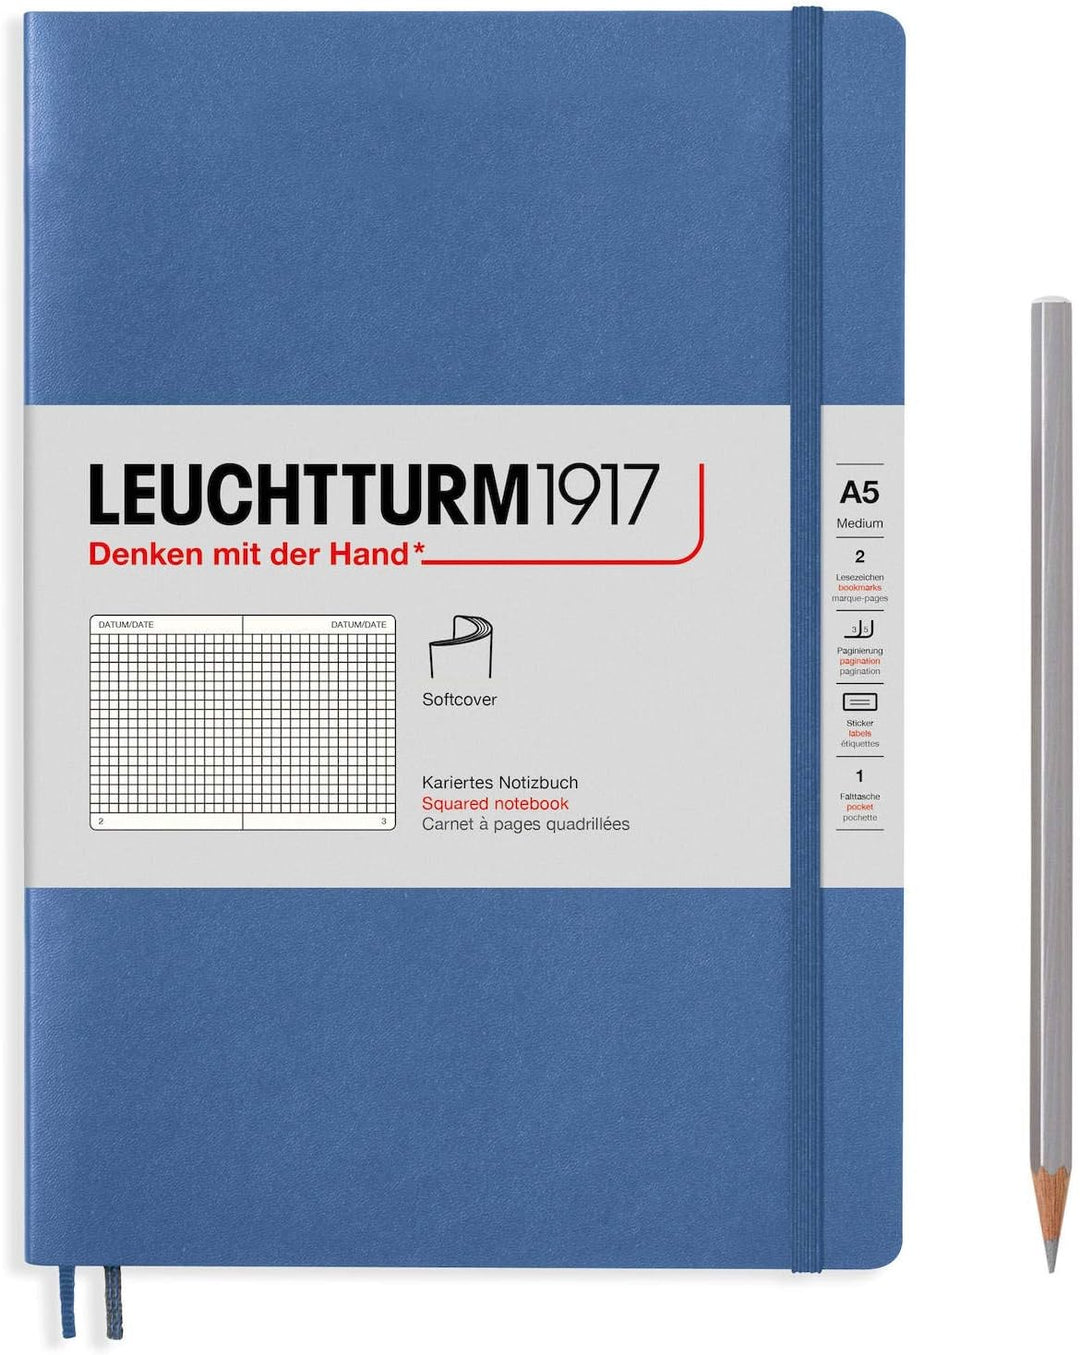 LEUCHTTRUM 1917 - Softcover A5 Notebook - 123 Numbered Pages - Denim